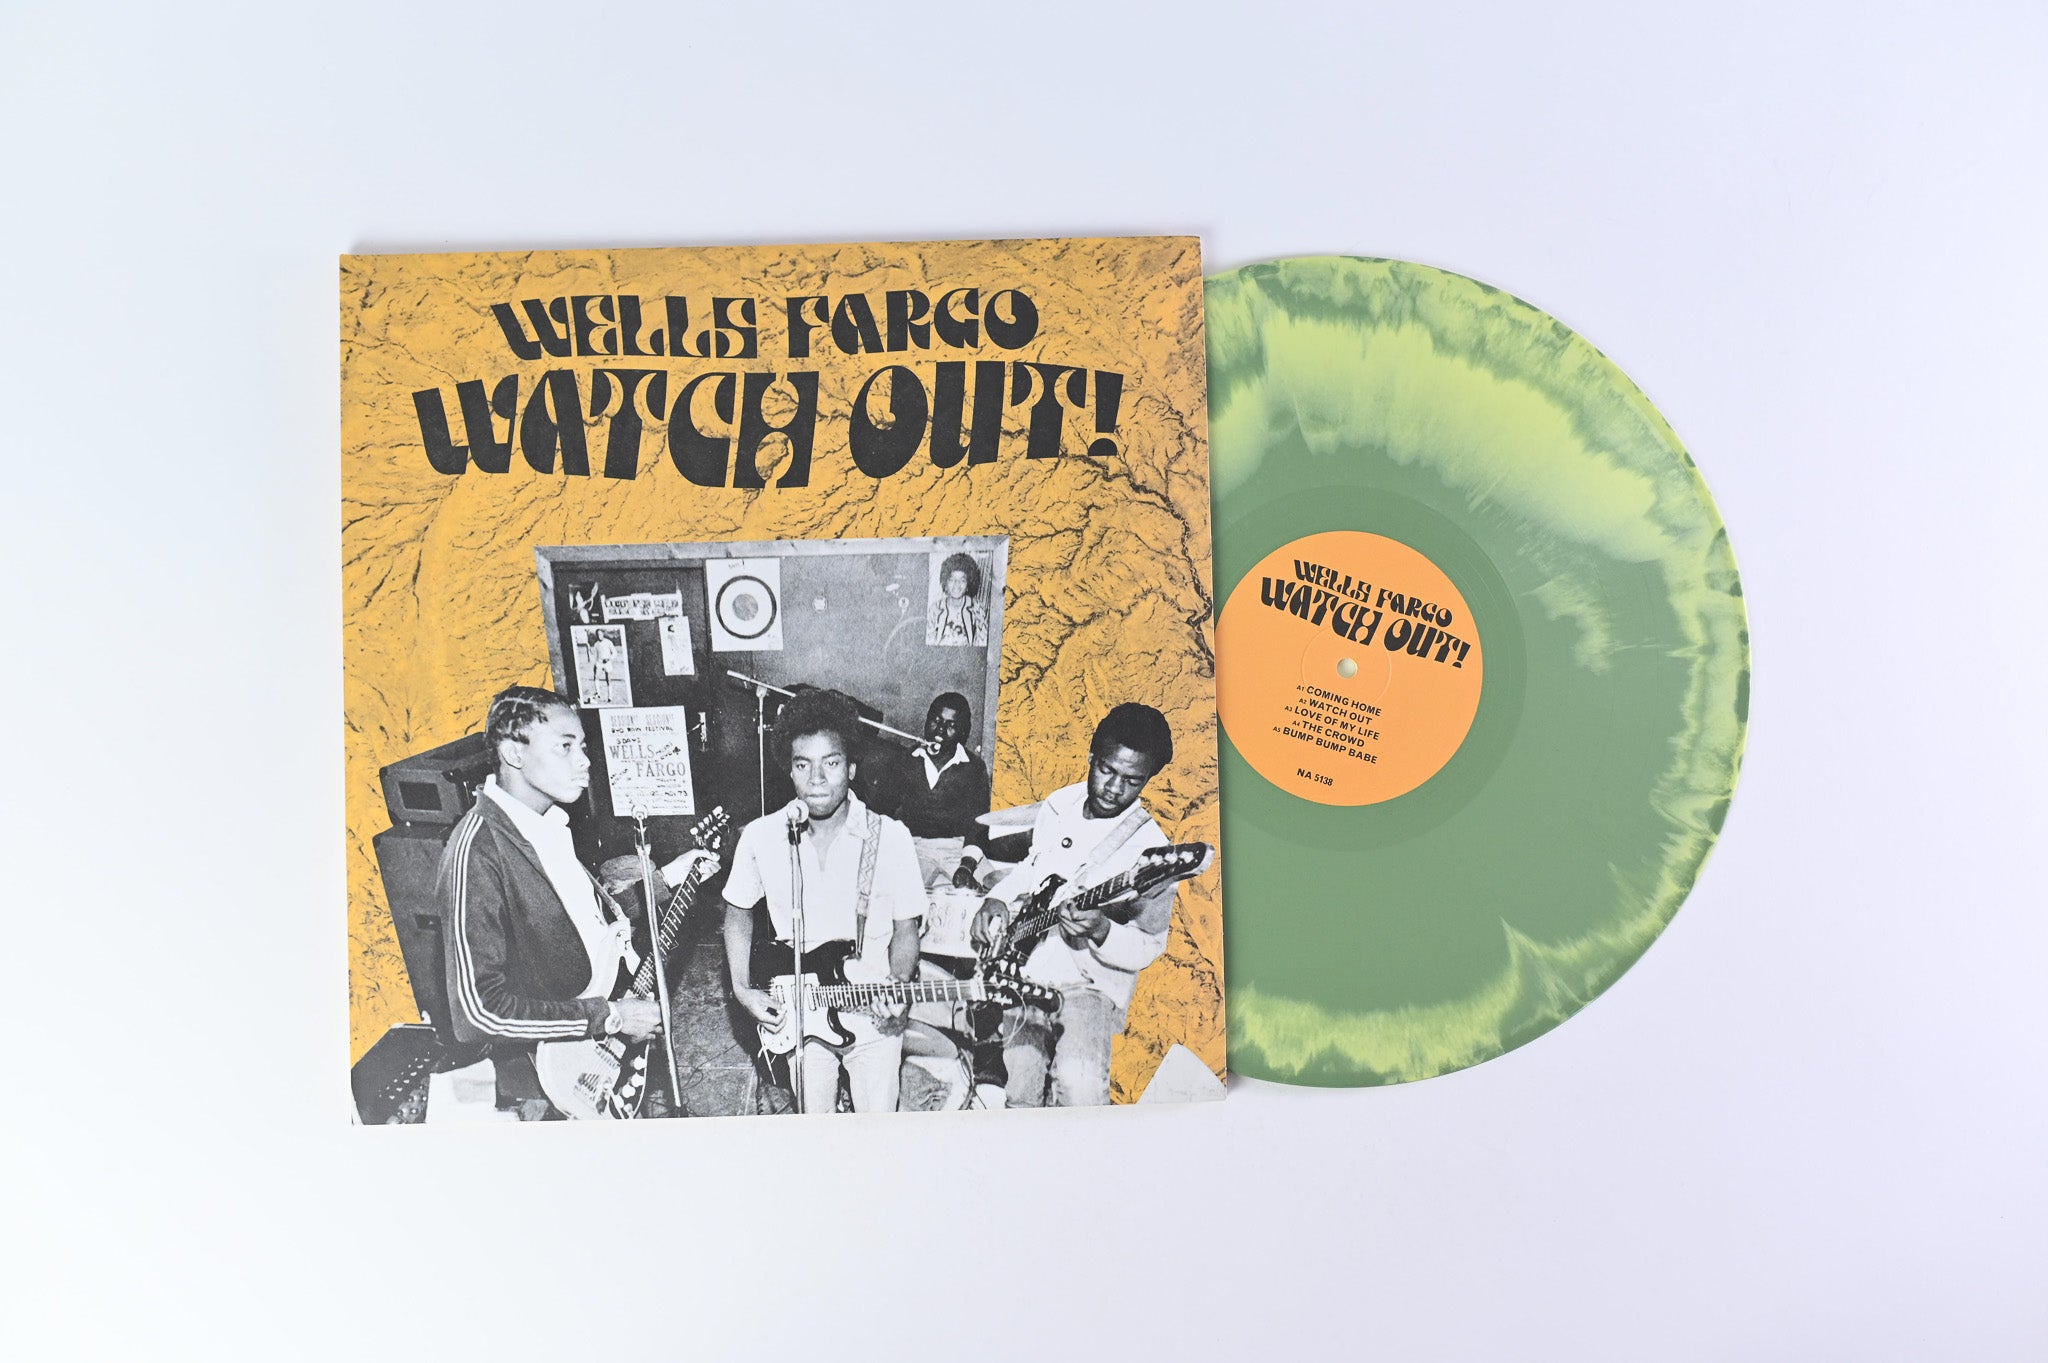 Wells Fargo - Watch Out! on Now-Again / Vinyl Me, Please - Yellow / Green Marbled Colored Vinyl